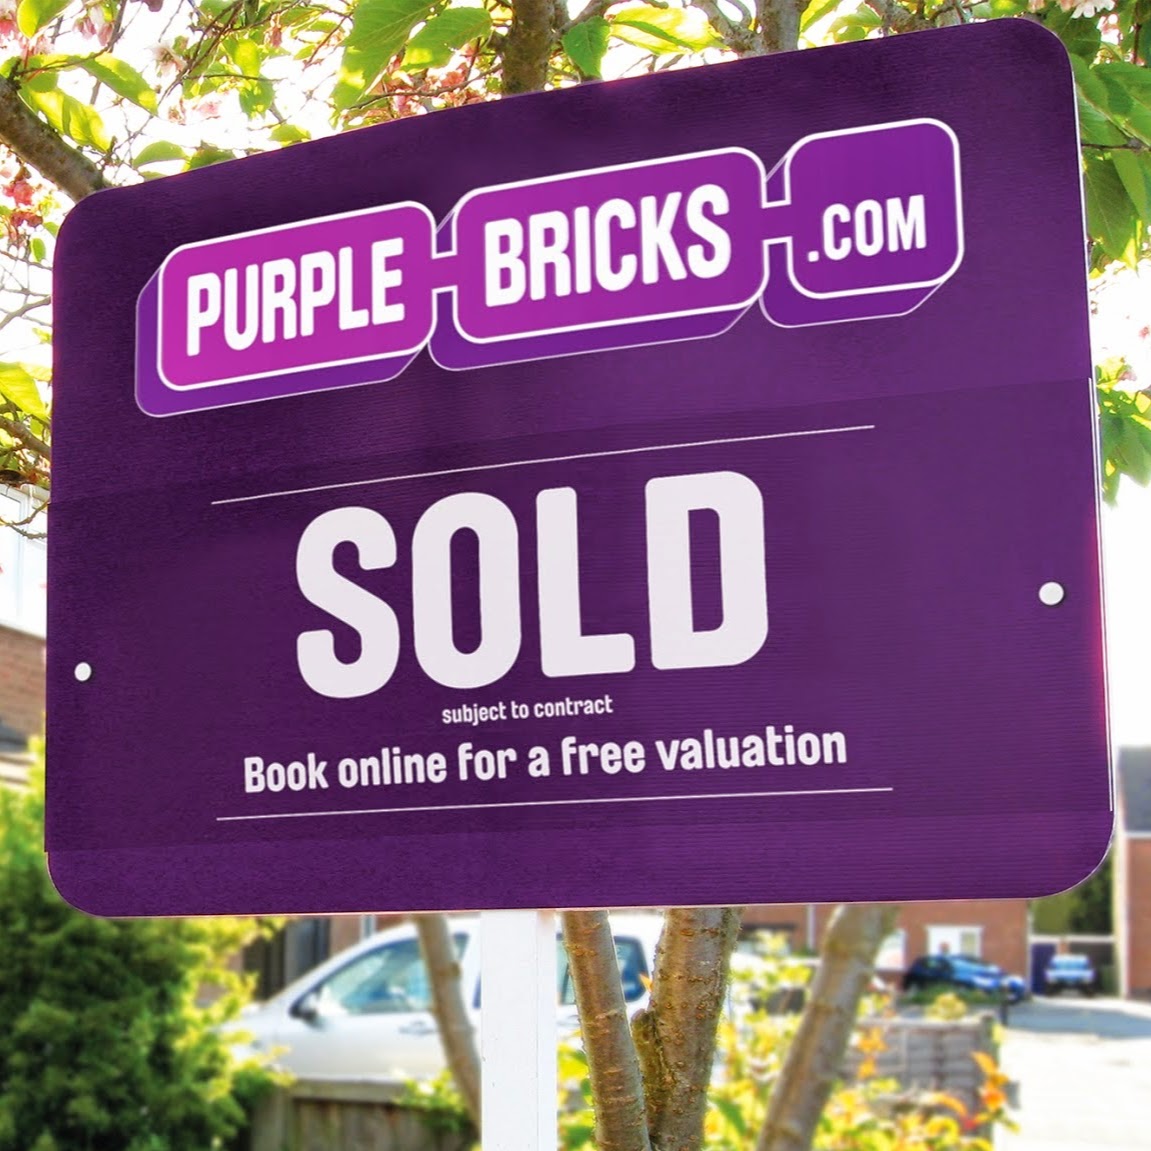 Purplebricks is making plenty of noise but what about the other online estate agents?